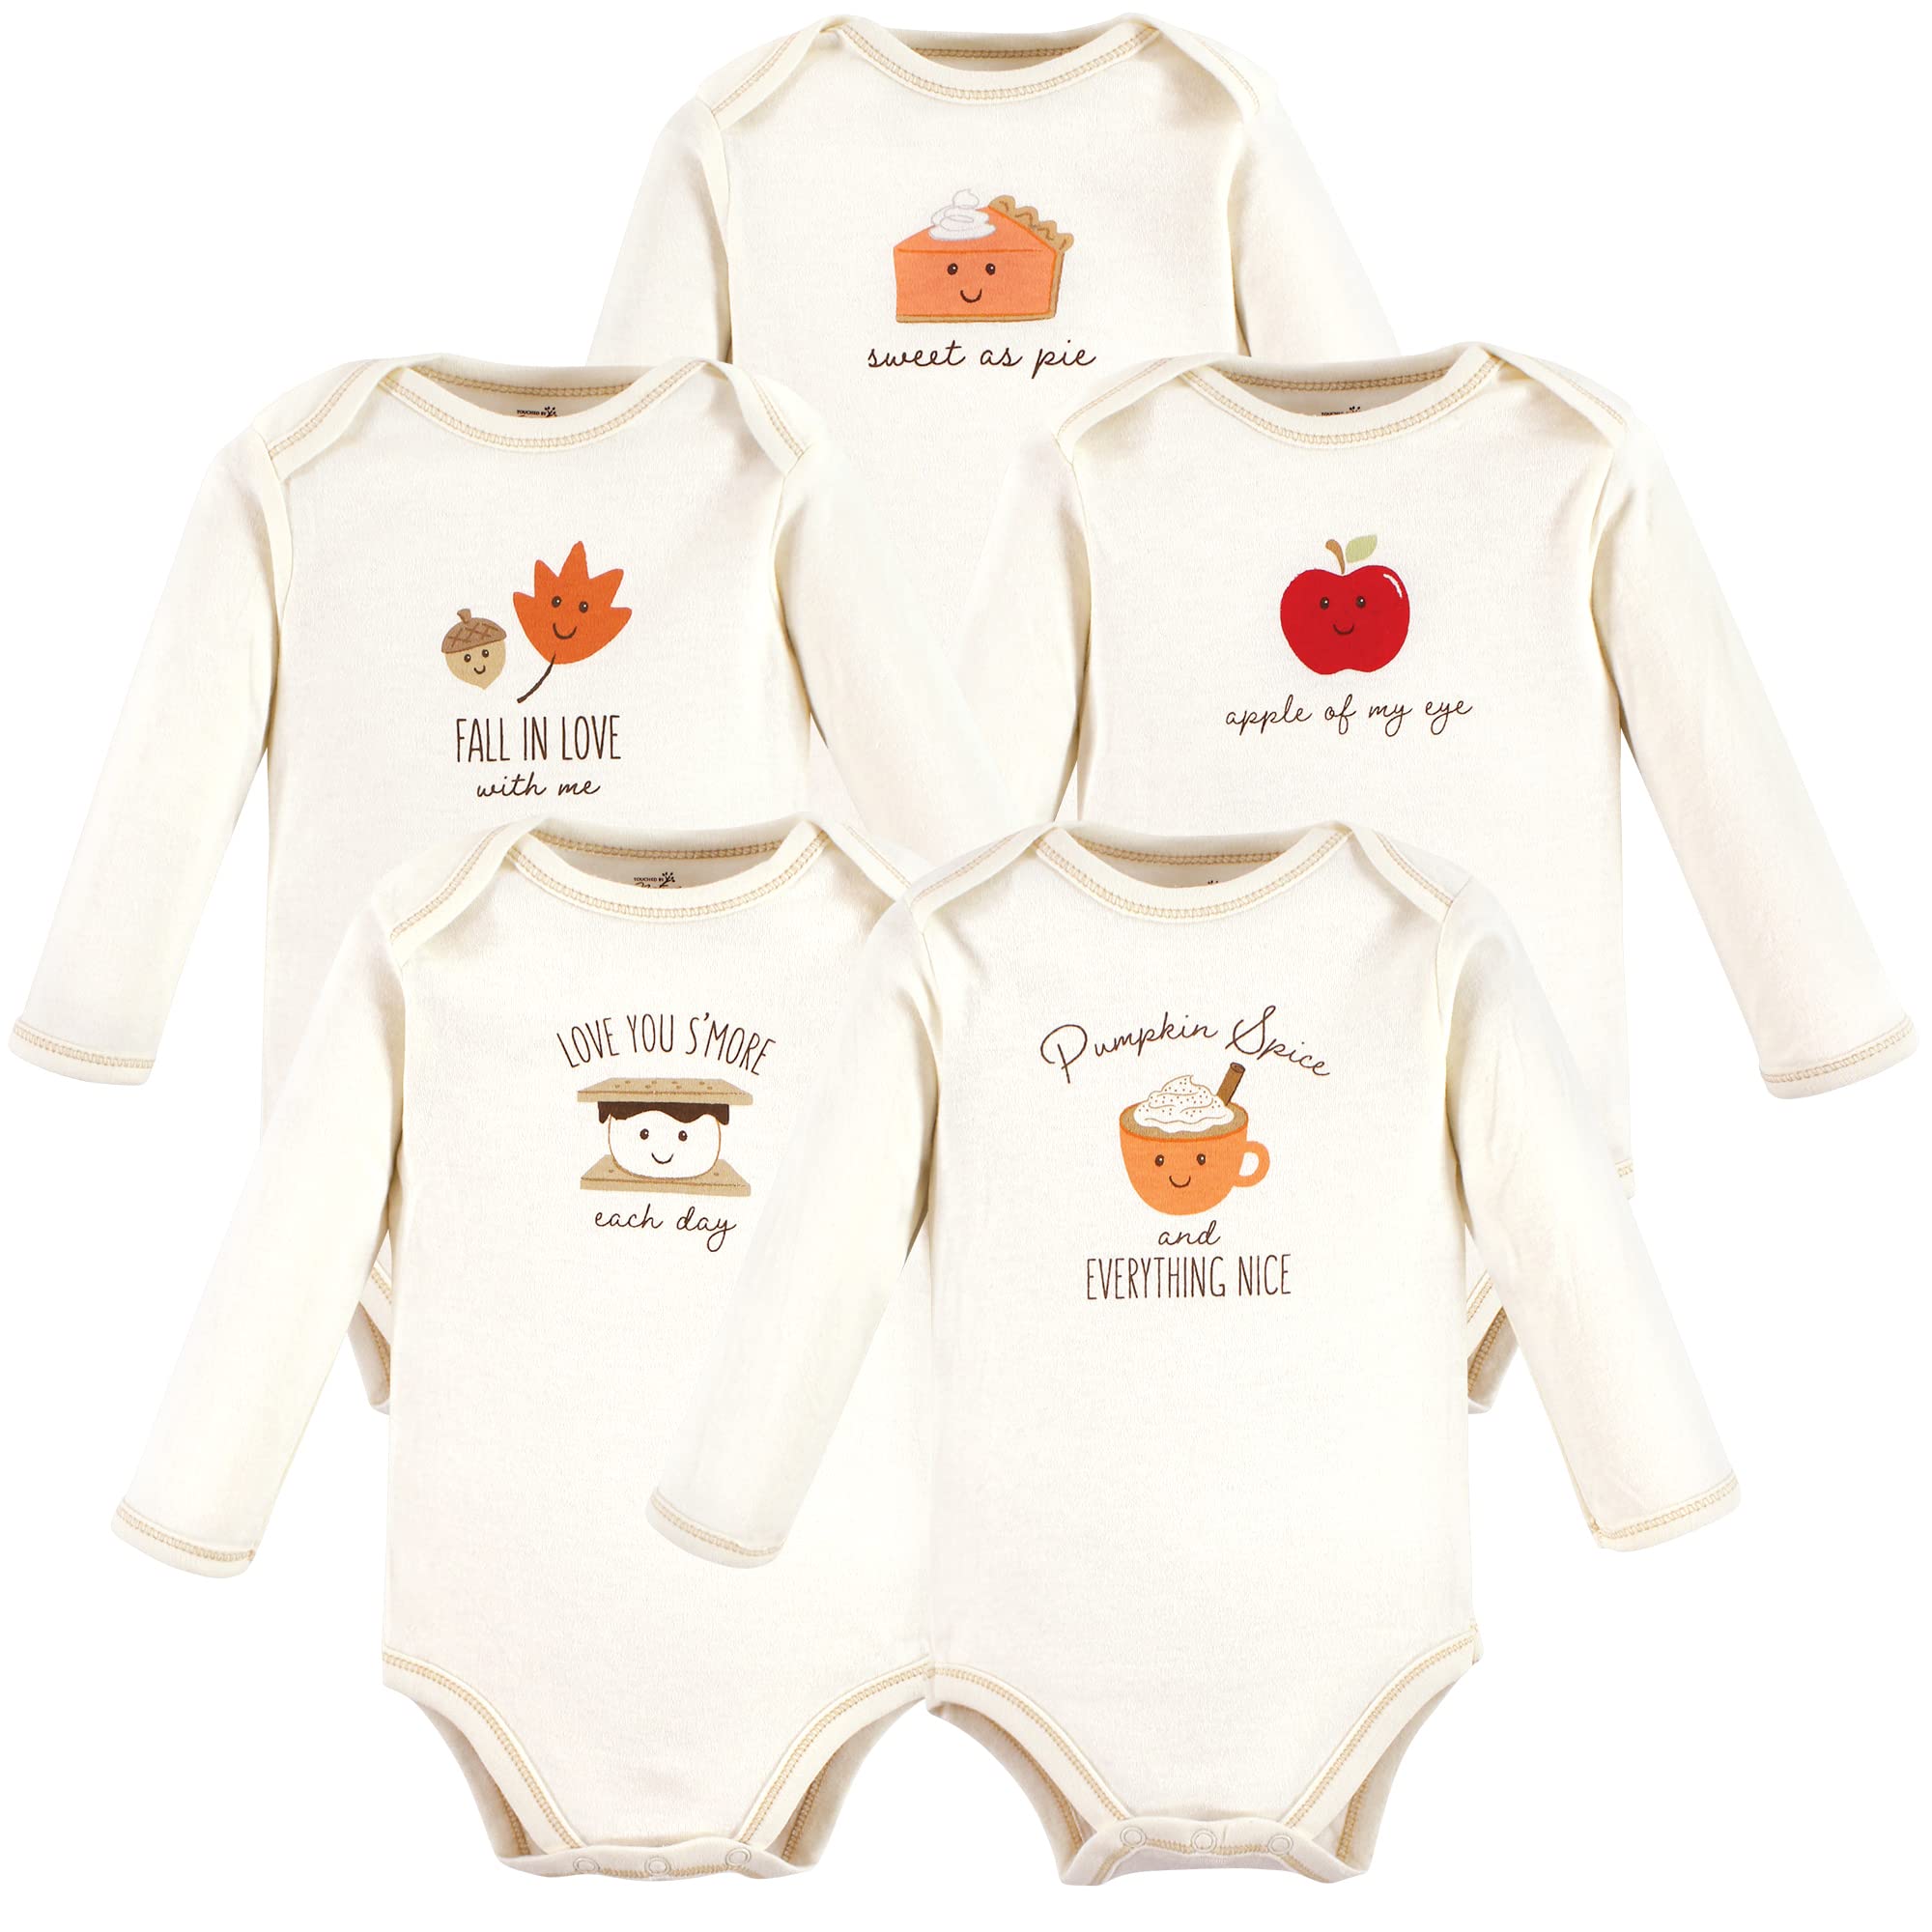 Touched by Nature unisex-baby Organic Cotton Long-sleeve Bodysuits